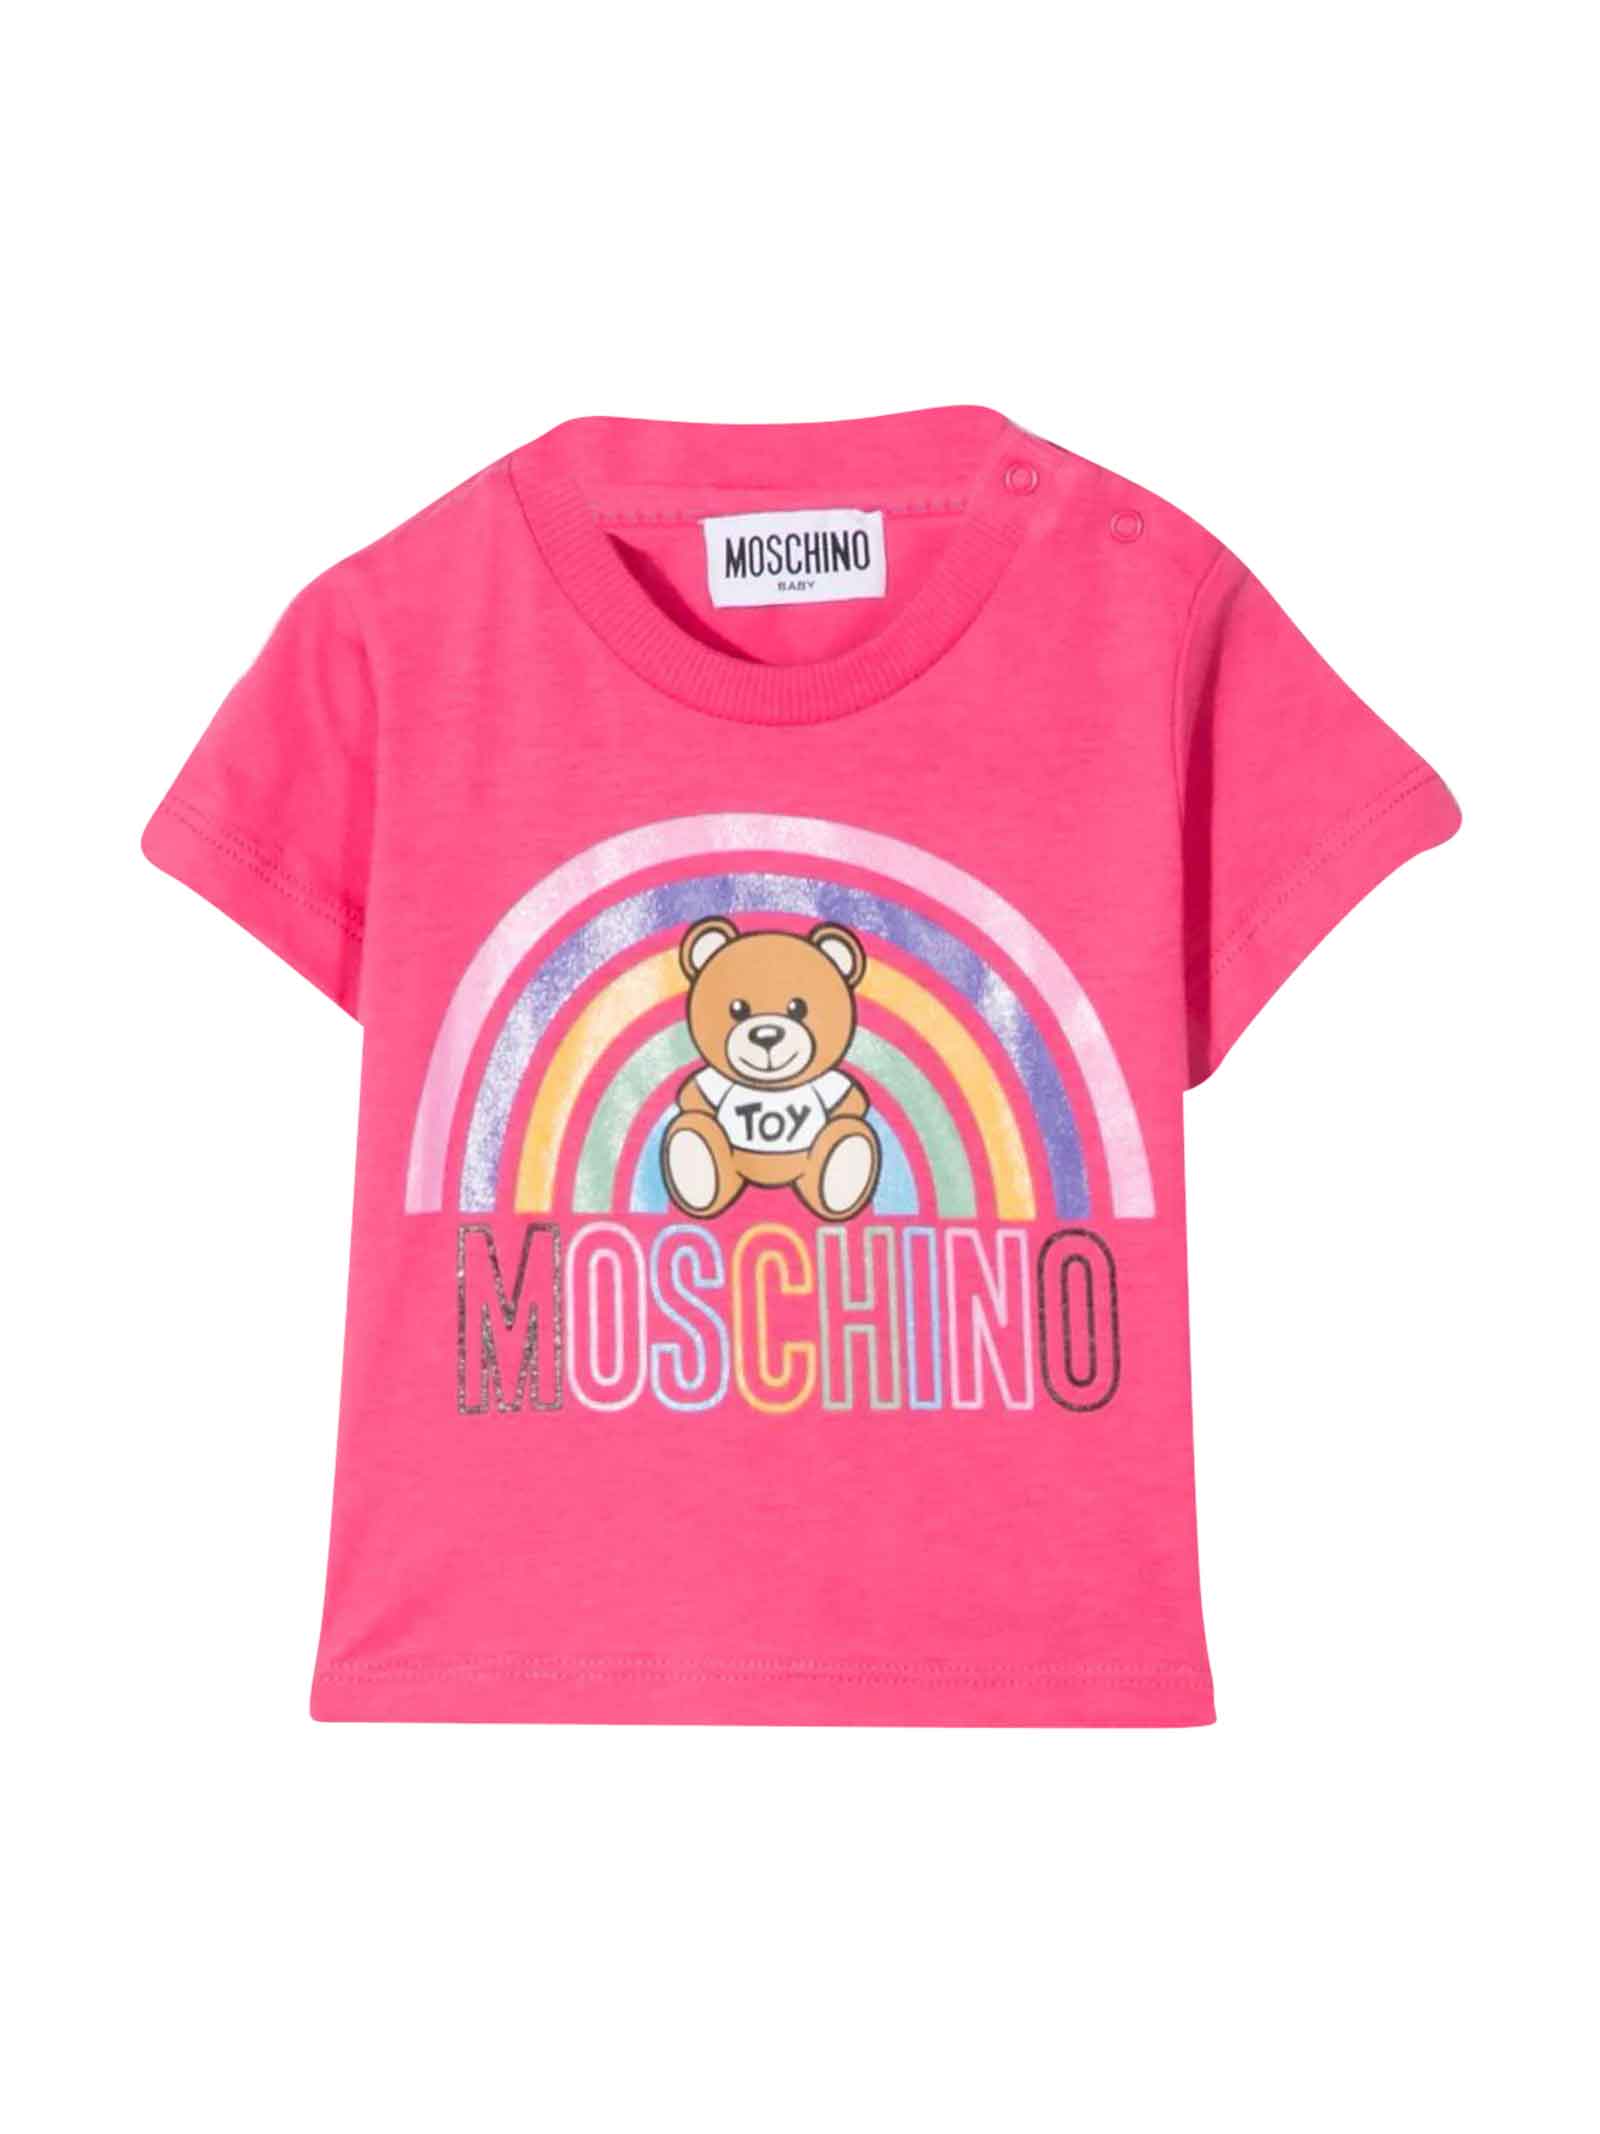 Moschino Pink T-shirt With Toy Print